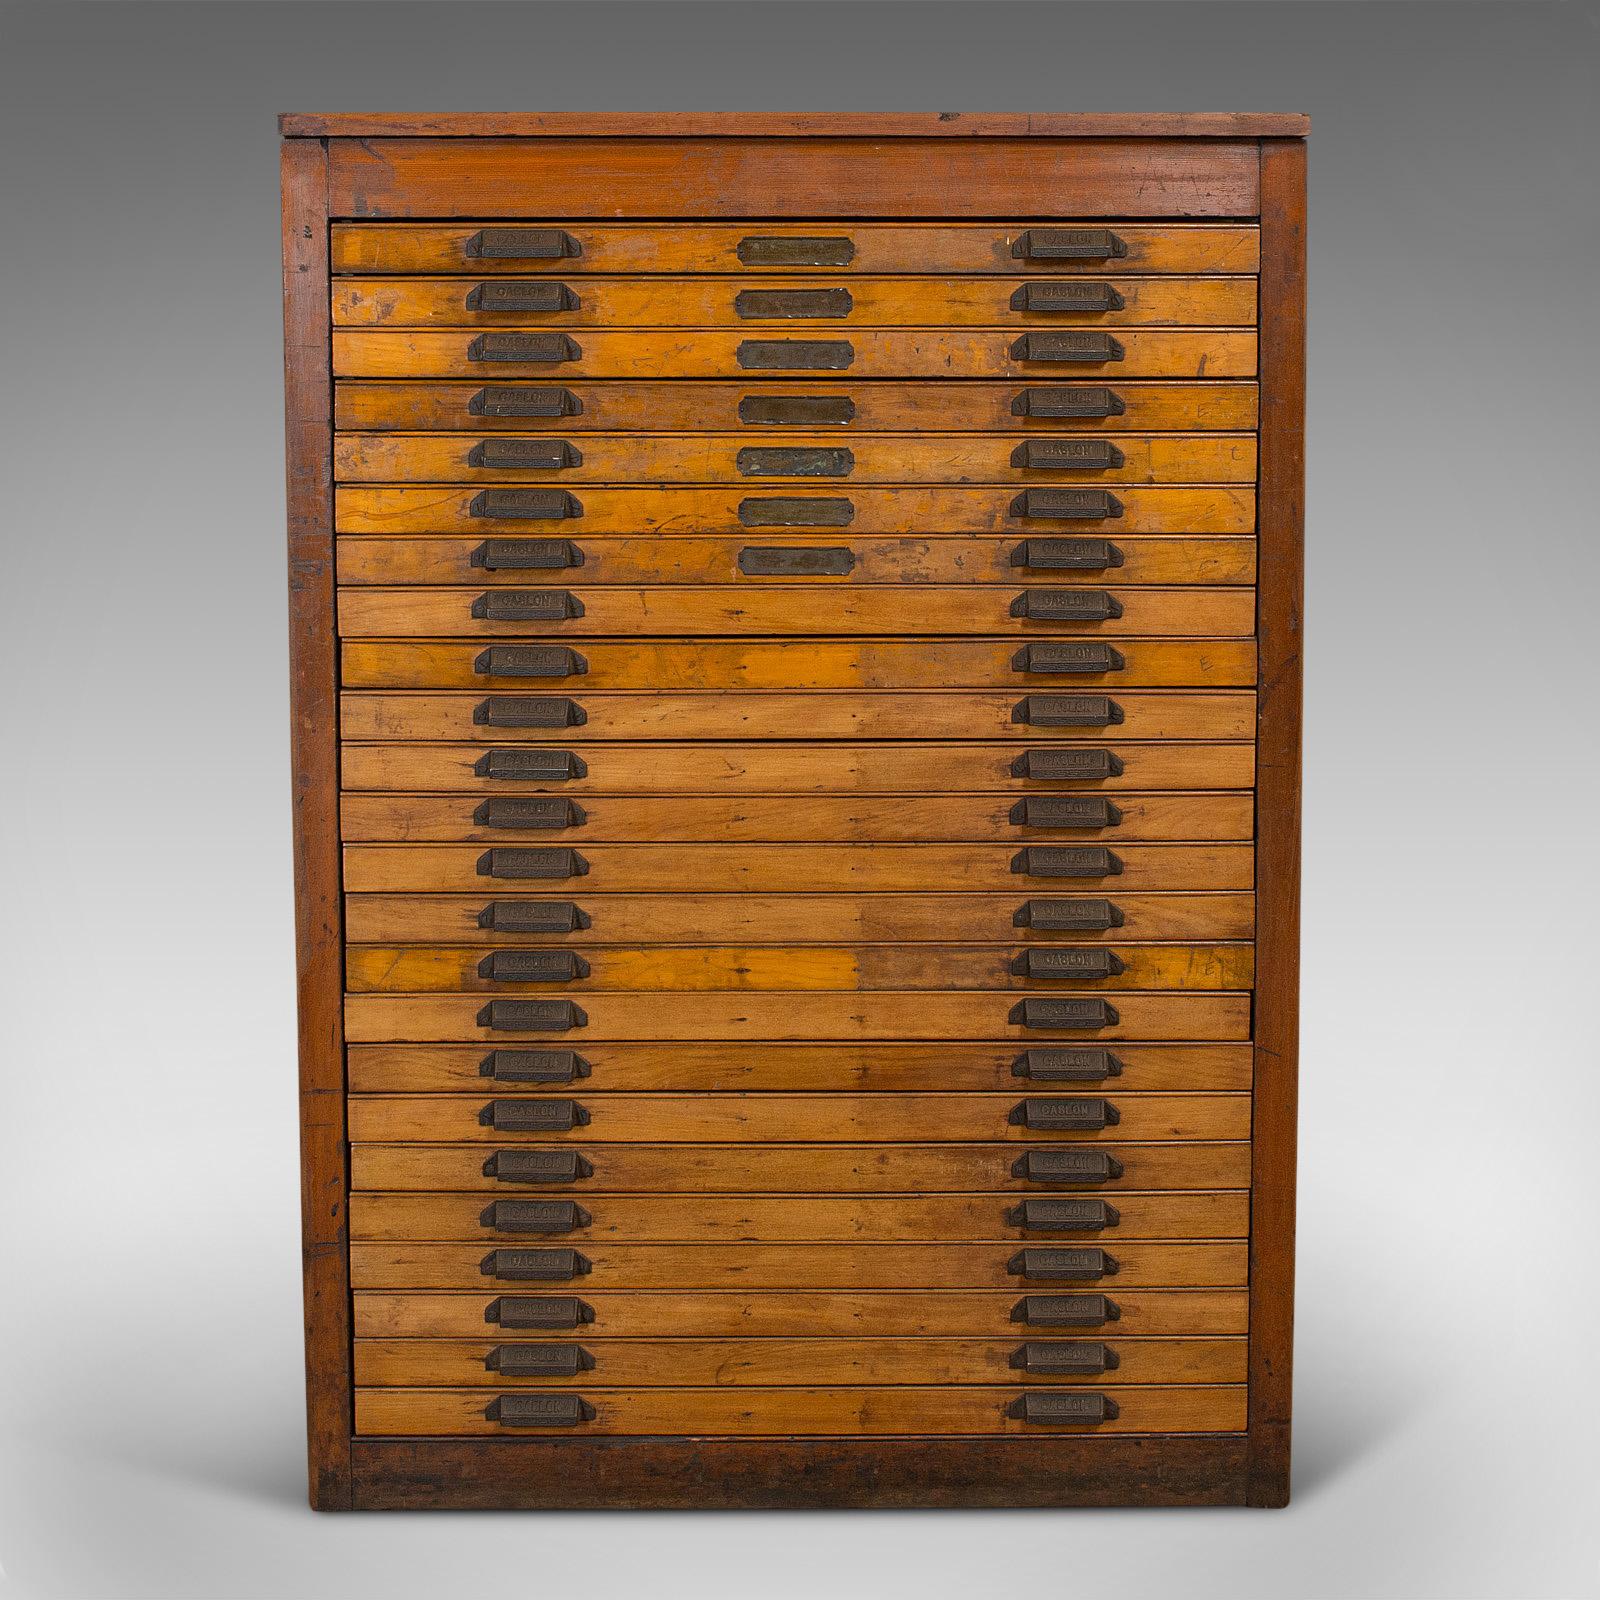 This is a large antique printer's cabinet. An English, rare pitch pine industrial typeface chest, ideal as a plan chest, specimen or art vault with maker's mark for Caslon Printers, dating to the late 19th century, circa 1900.

A fascinating